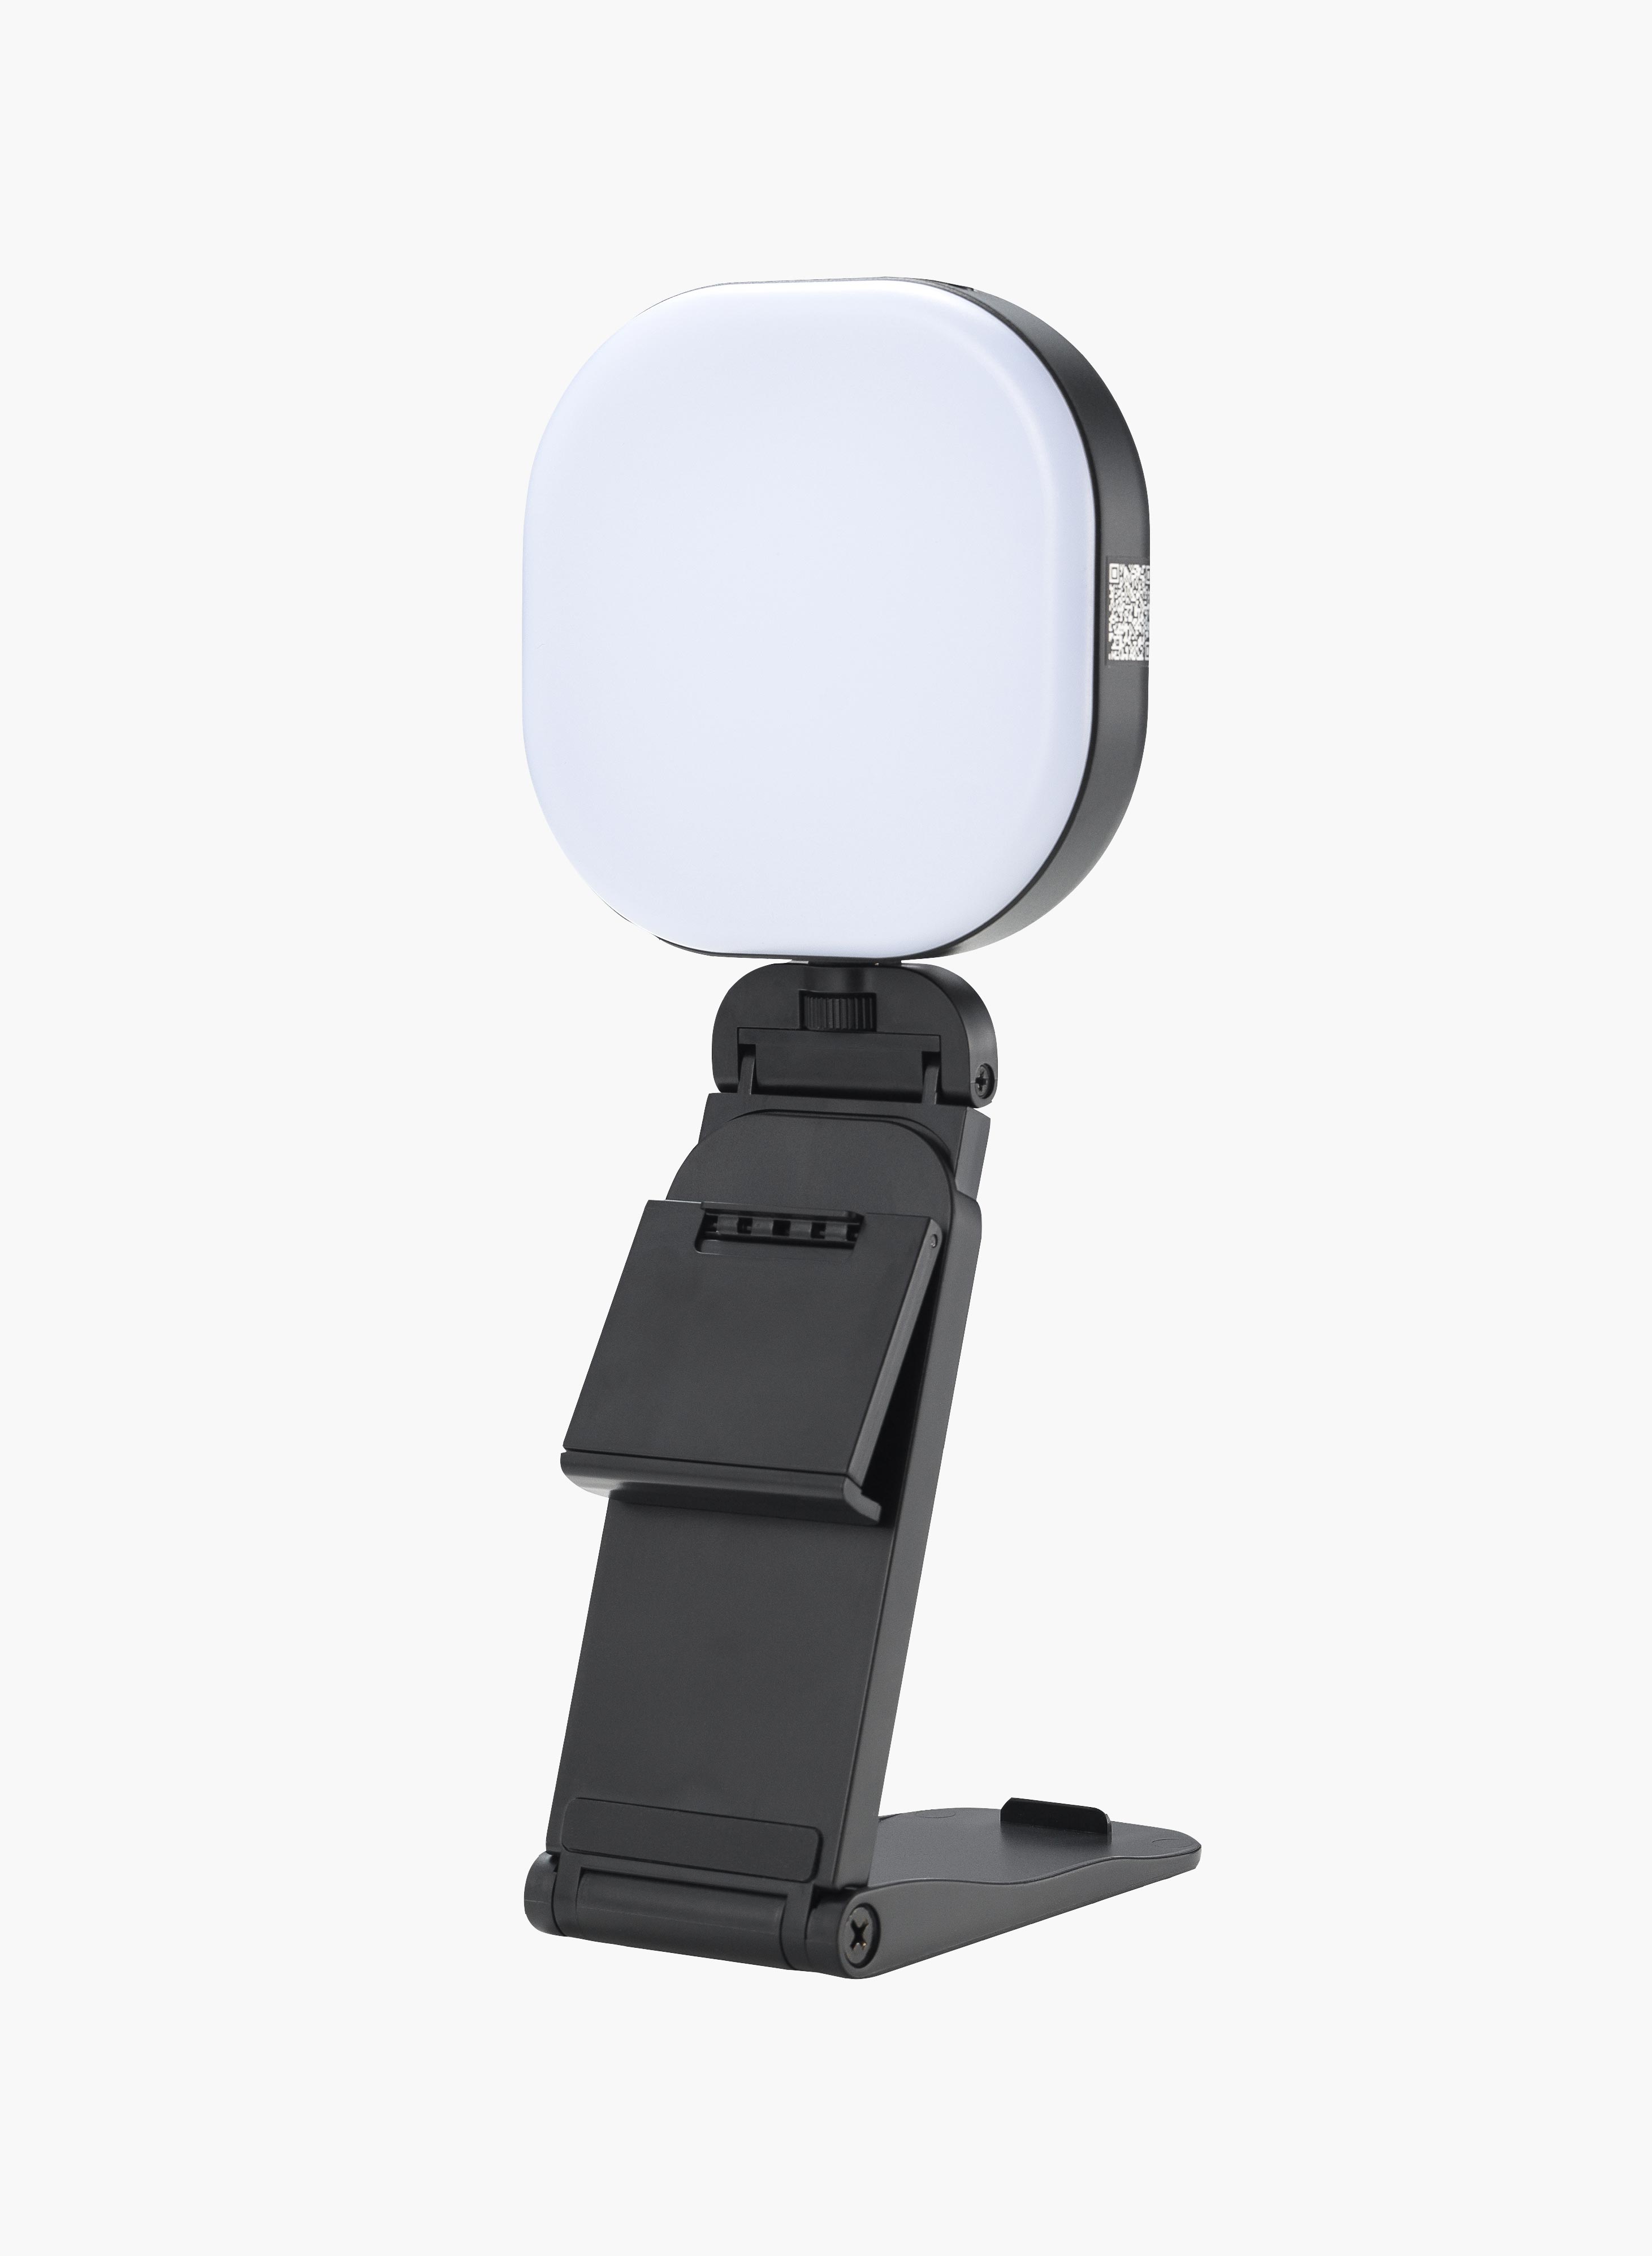 ProGlow™ Portable Video Conferencing Light connected to desk